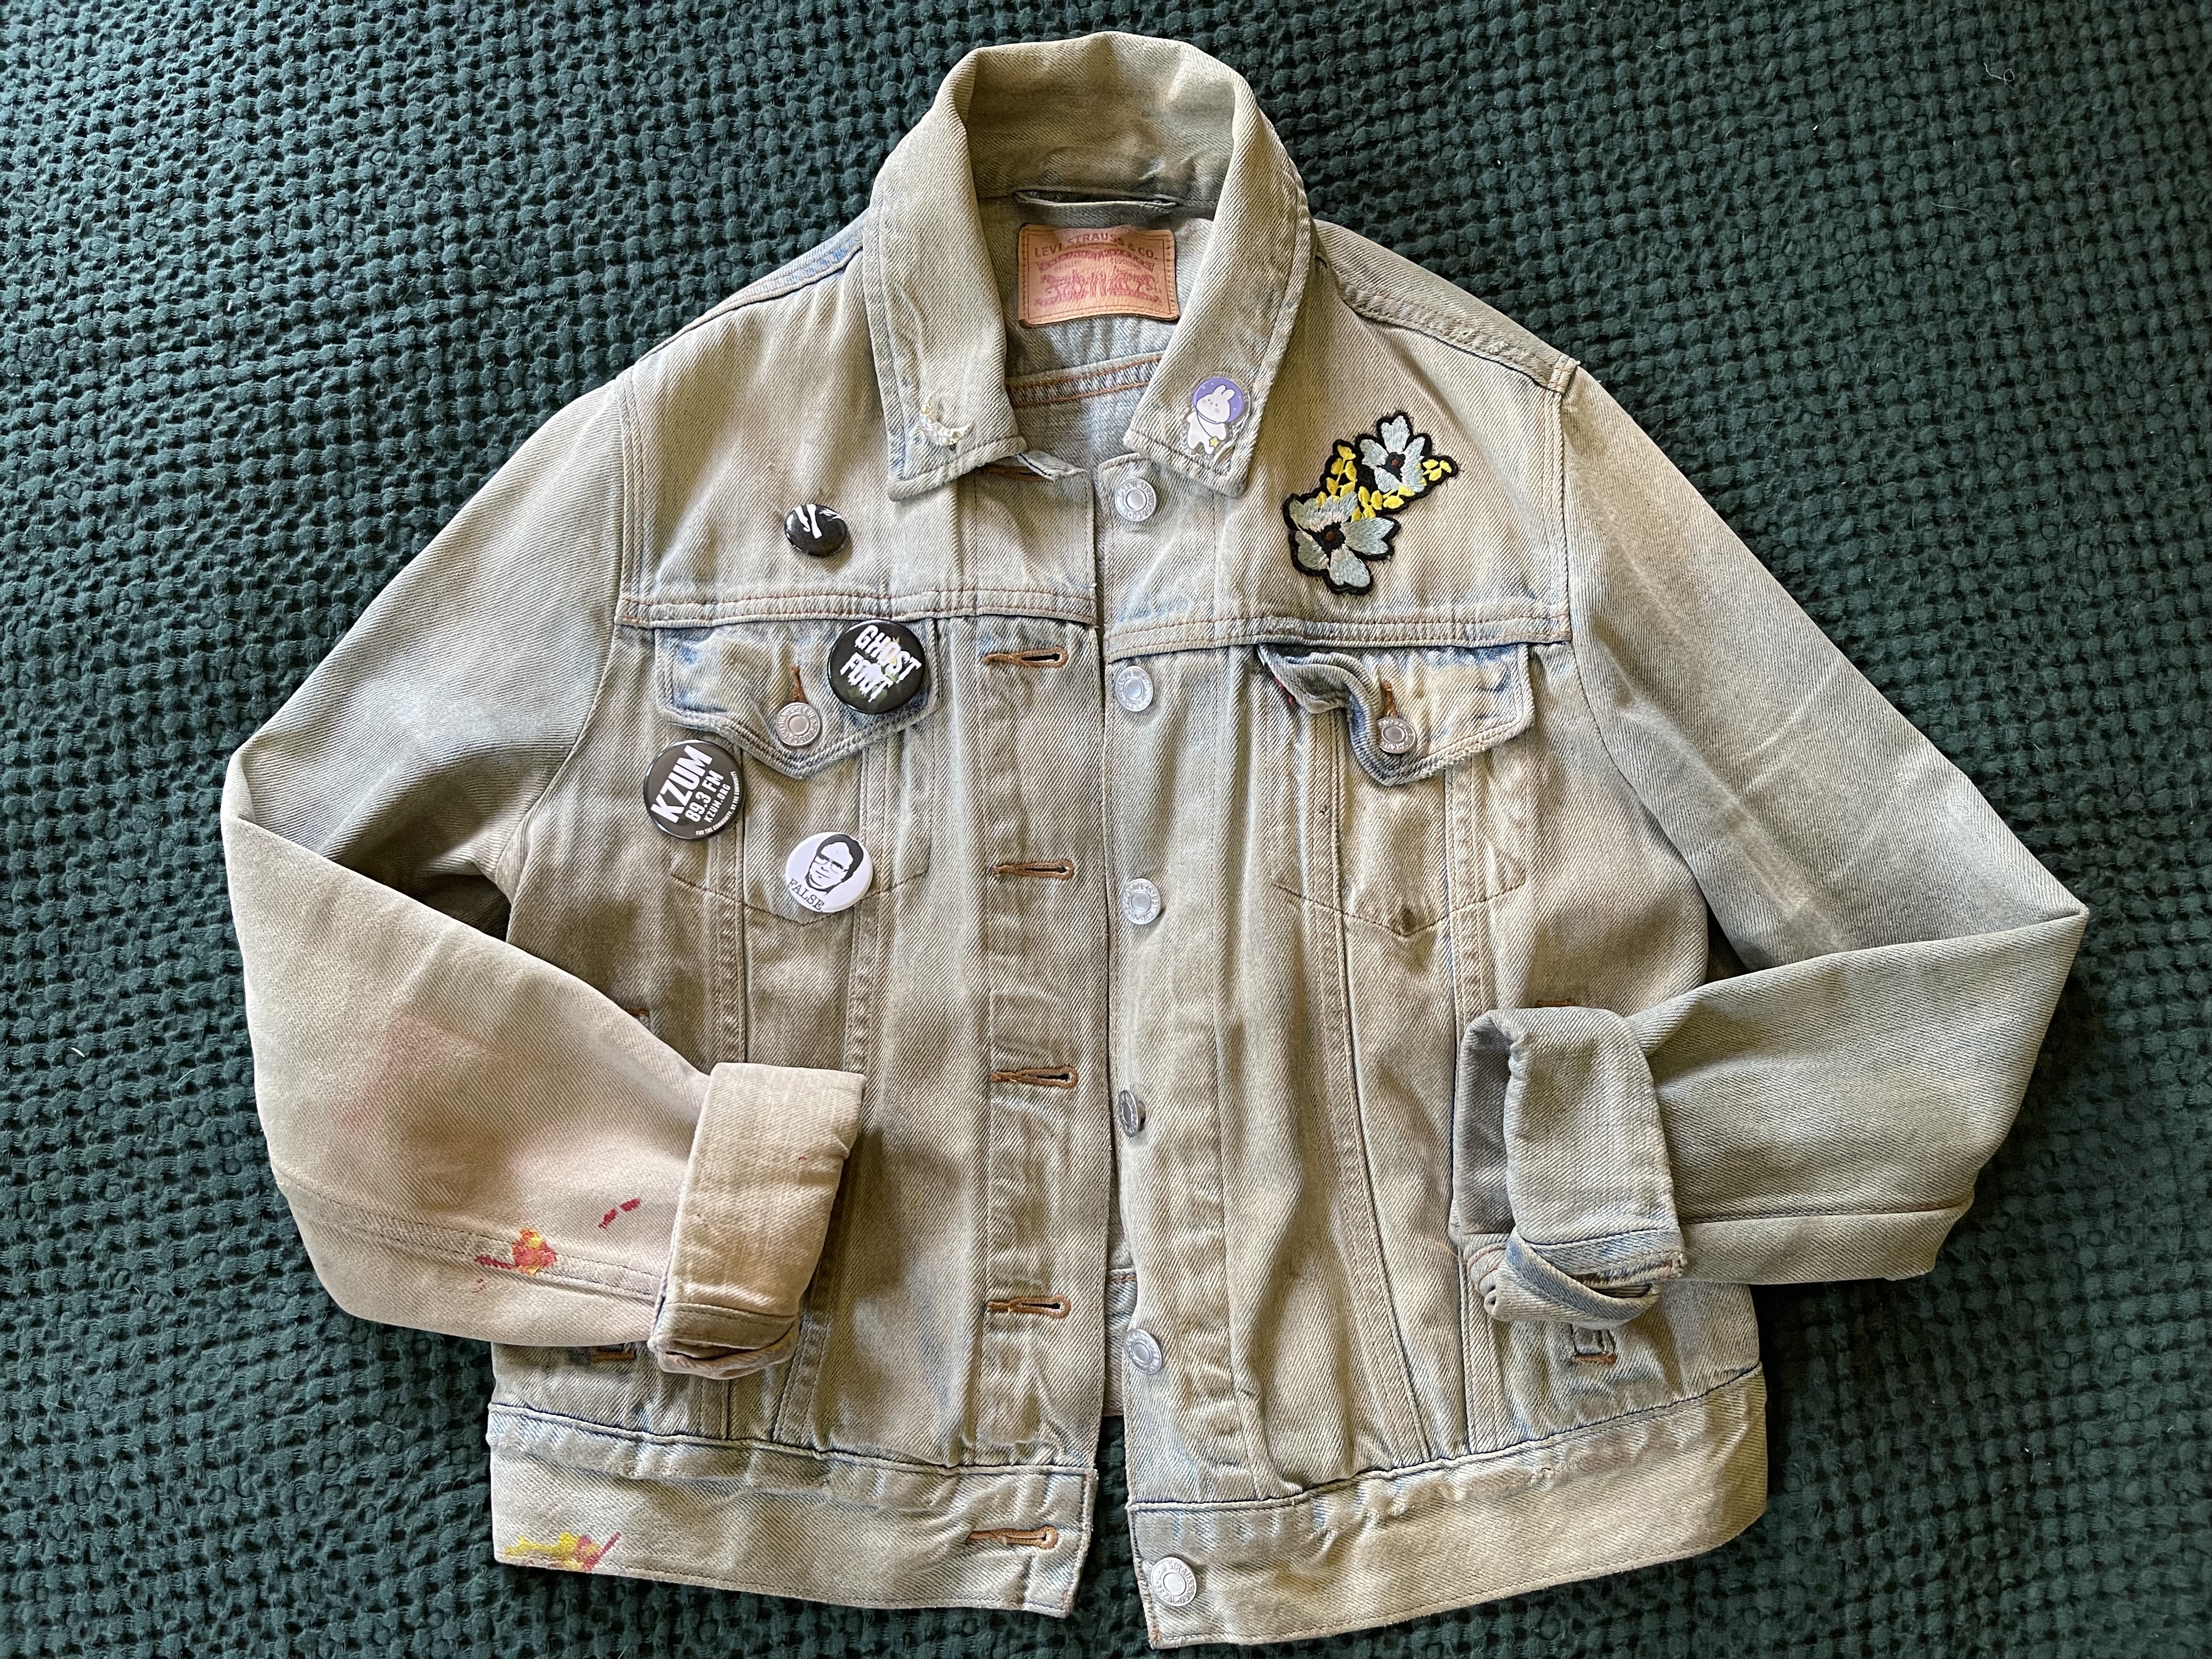 a jean jacket before it's been laundry stripped.